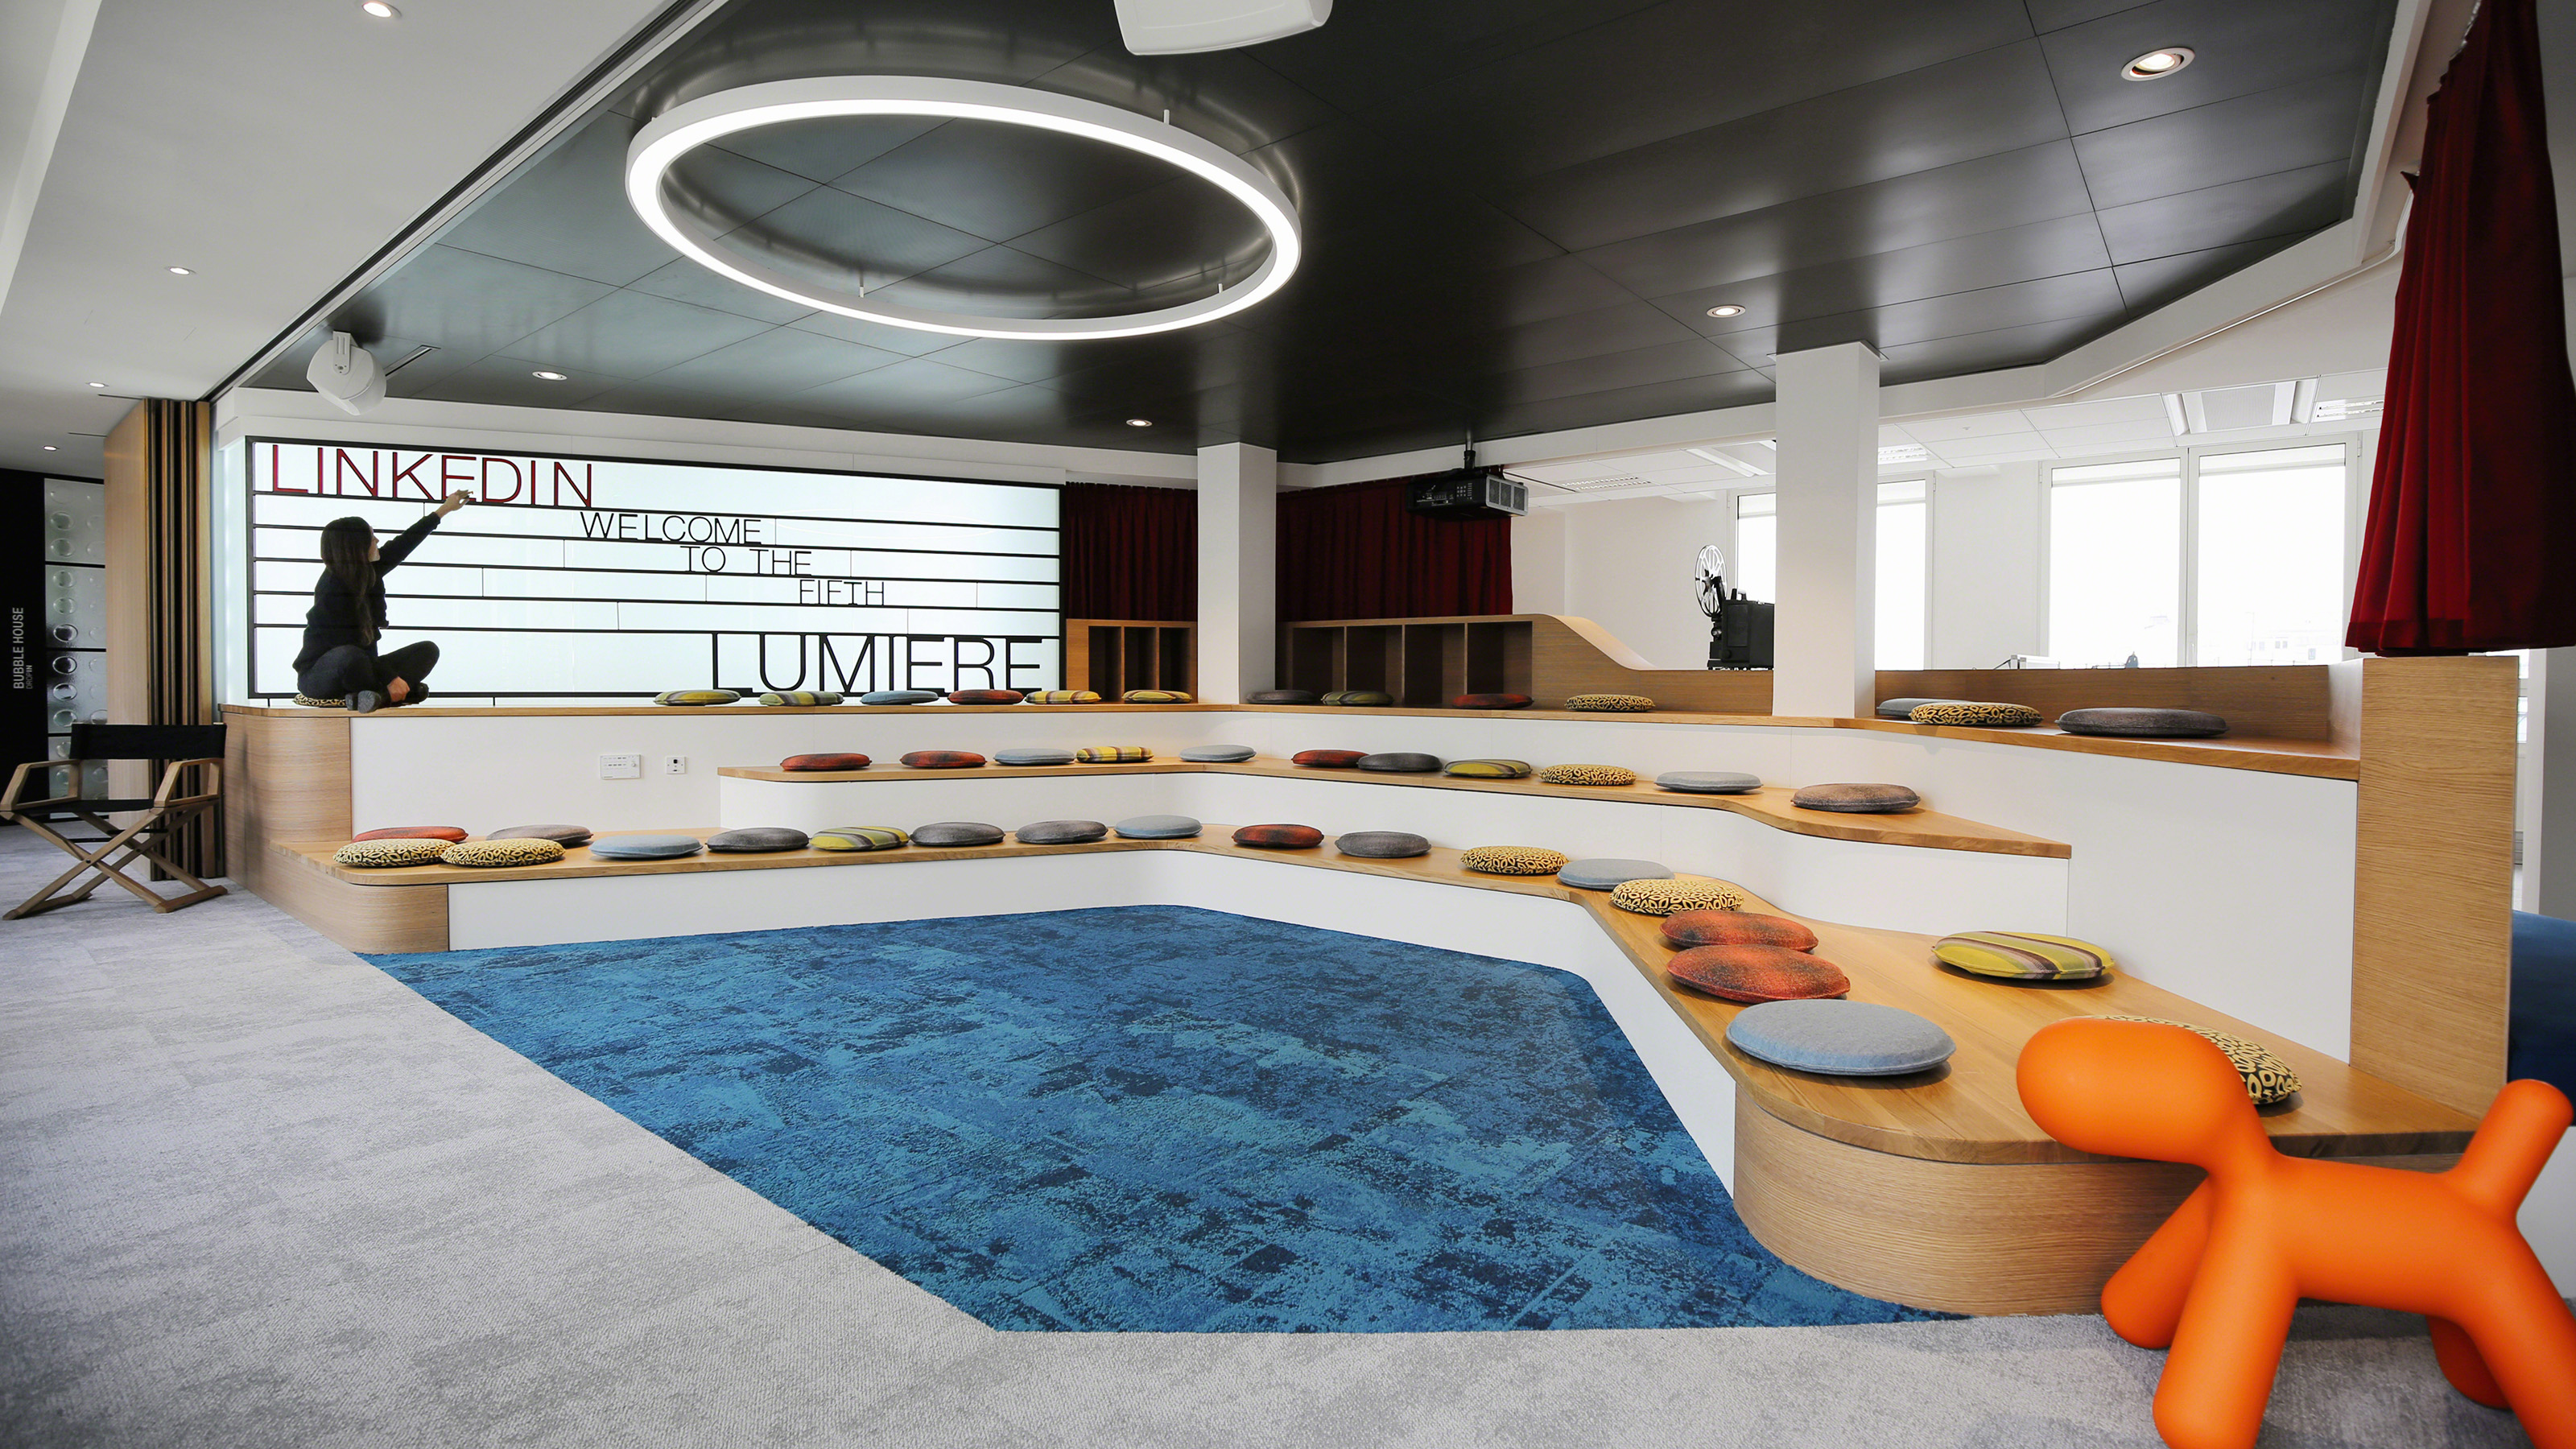 LinkedIn gathering area inspired by French cinema with angled rows to sit